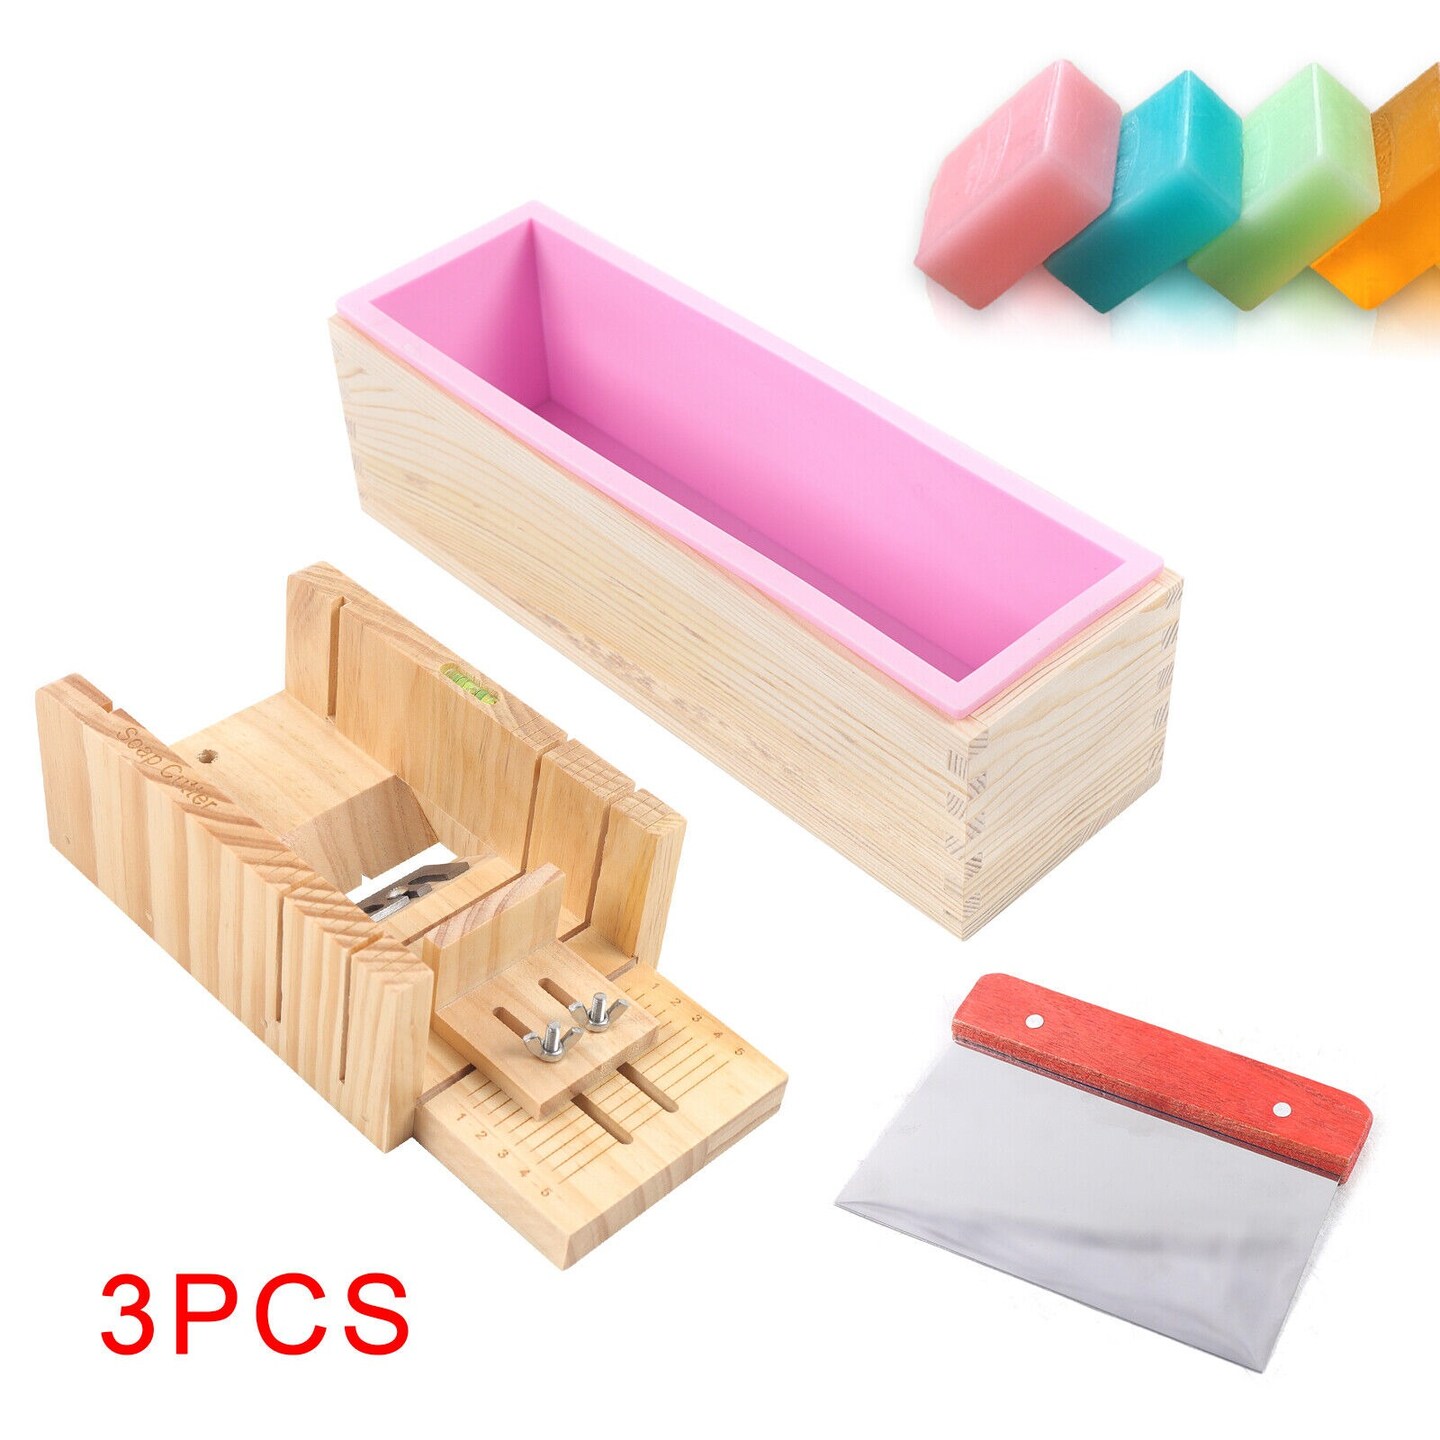 3Pcs DIY Soap Making Kit with Tools and Mold